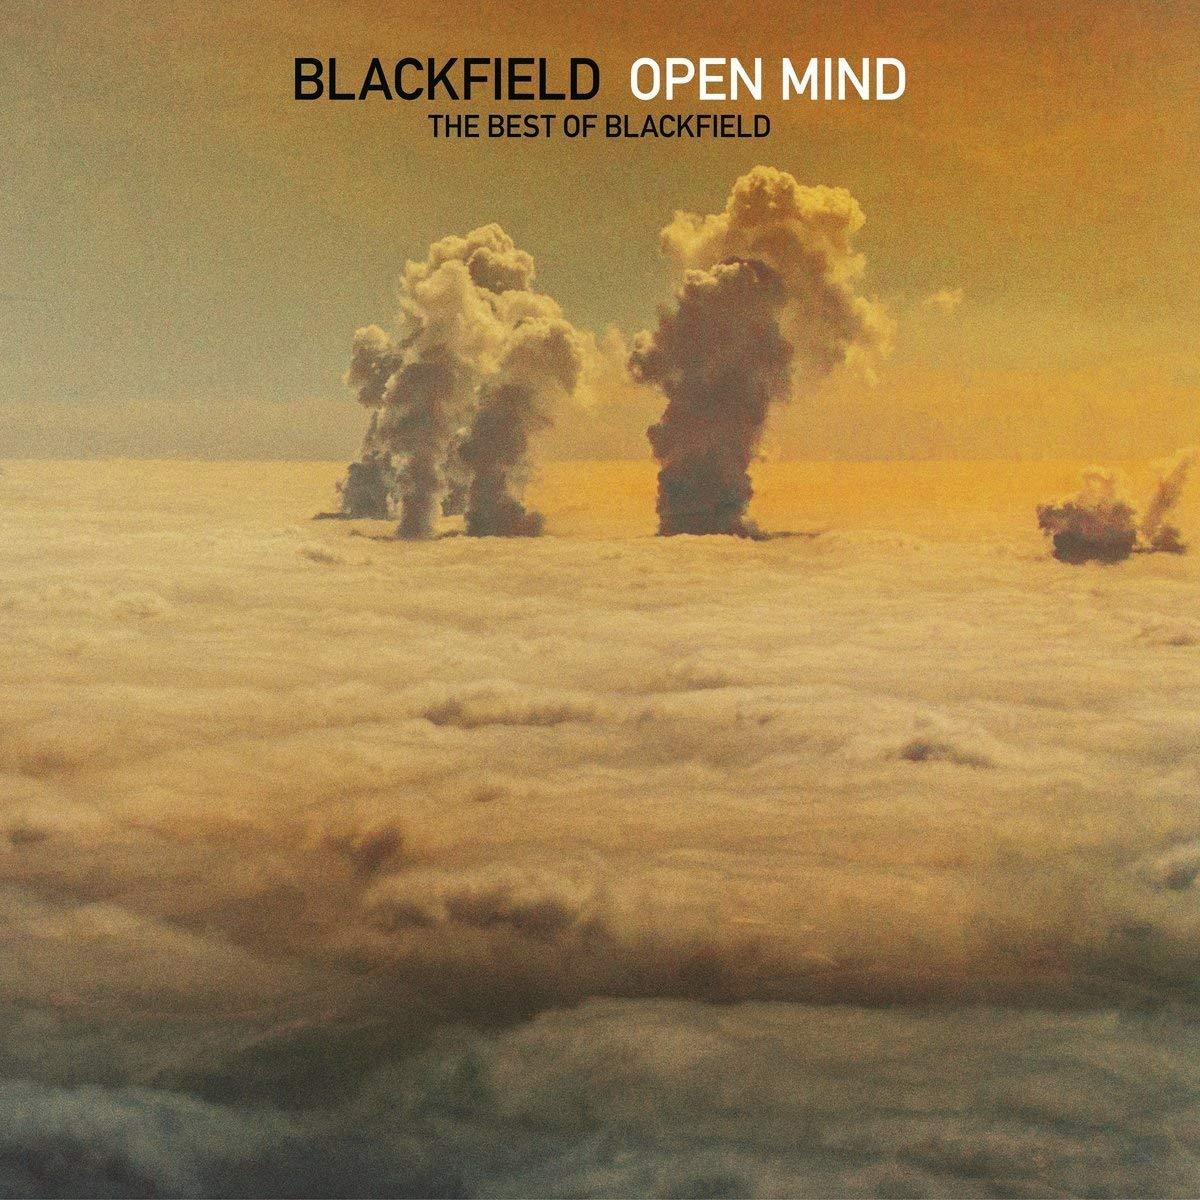 OPEN MIND: THE BEST OF